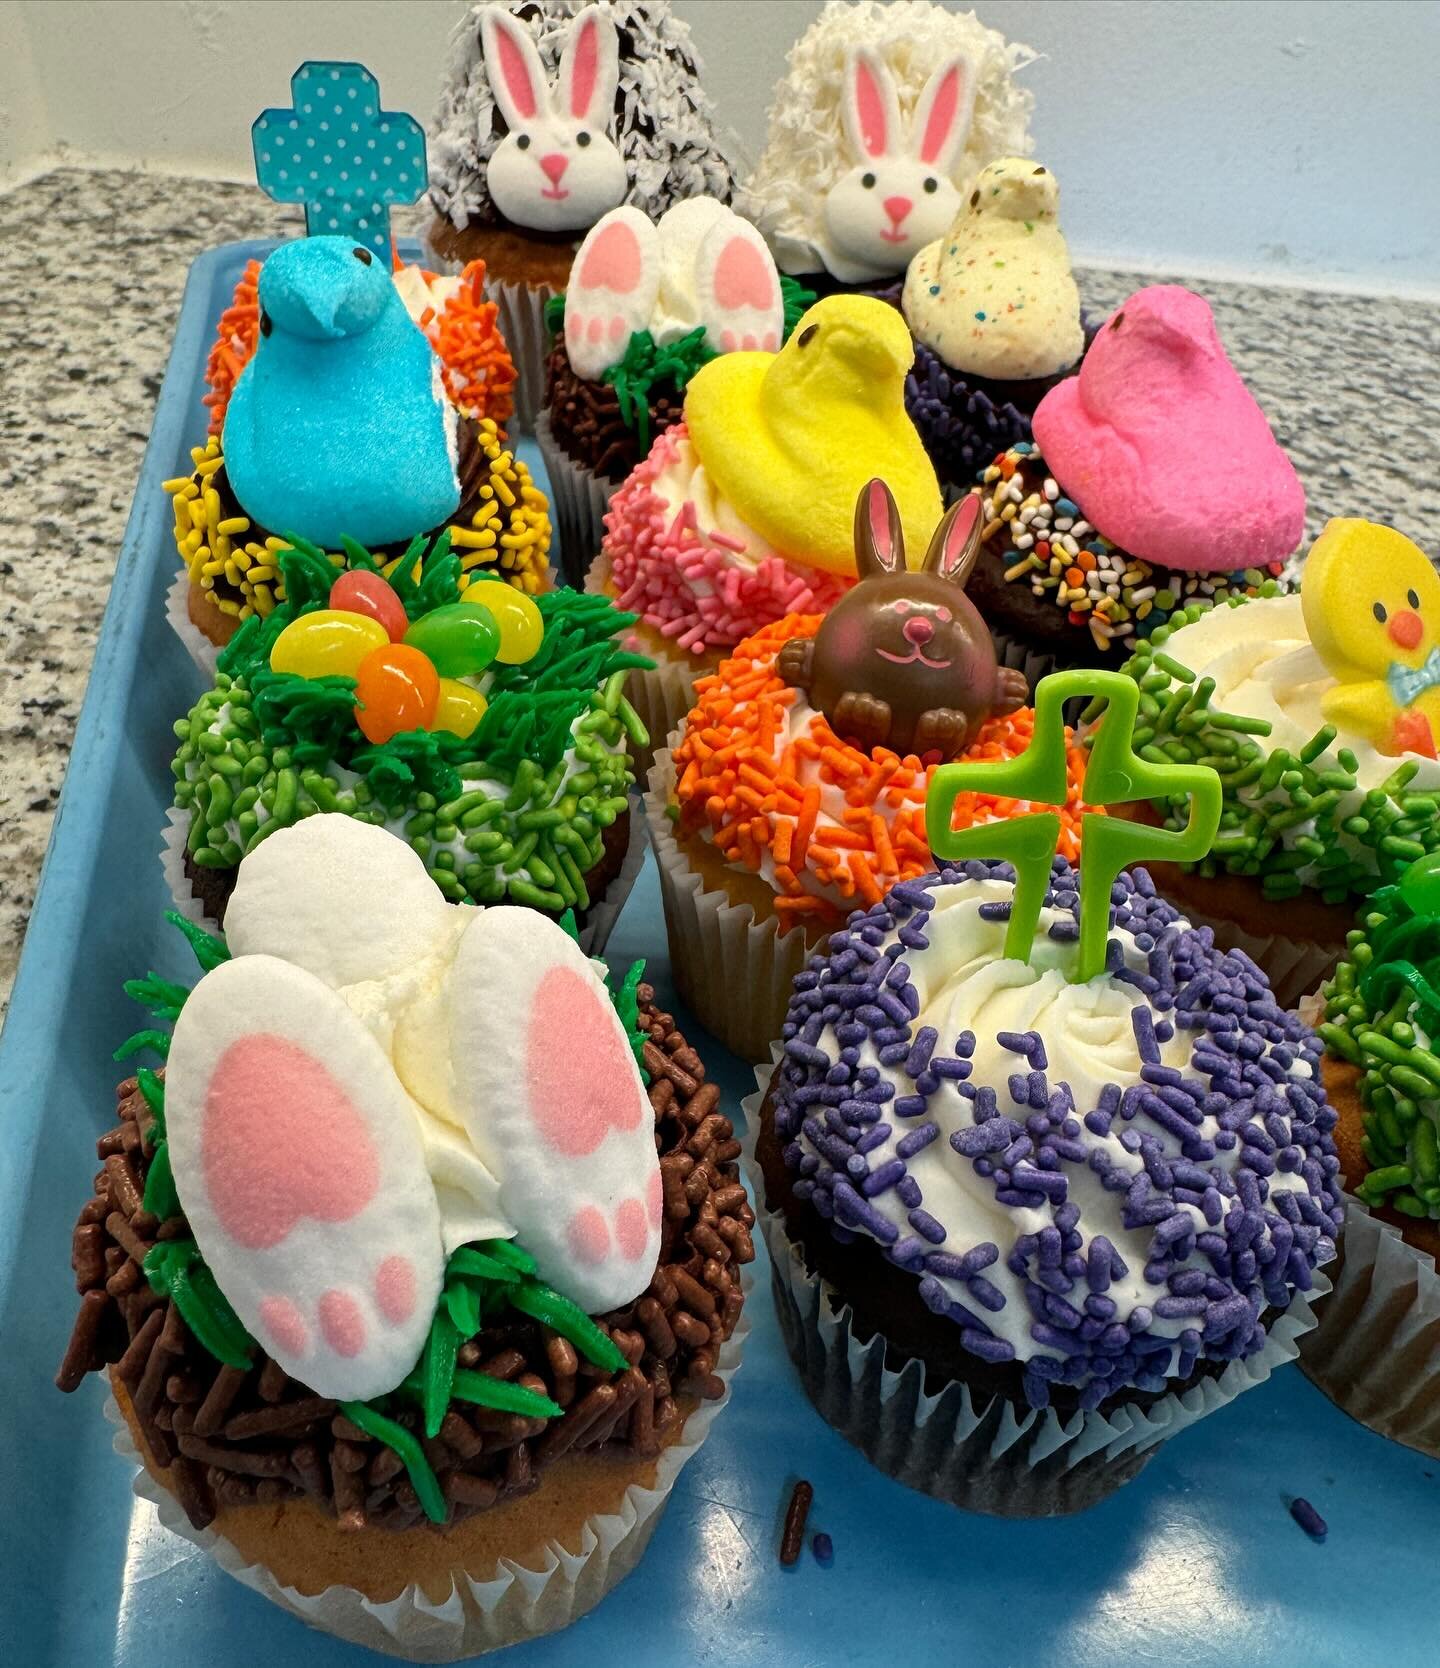 #easter has arrived early @sugarshackshop. Stop in and grab some festive treats